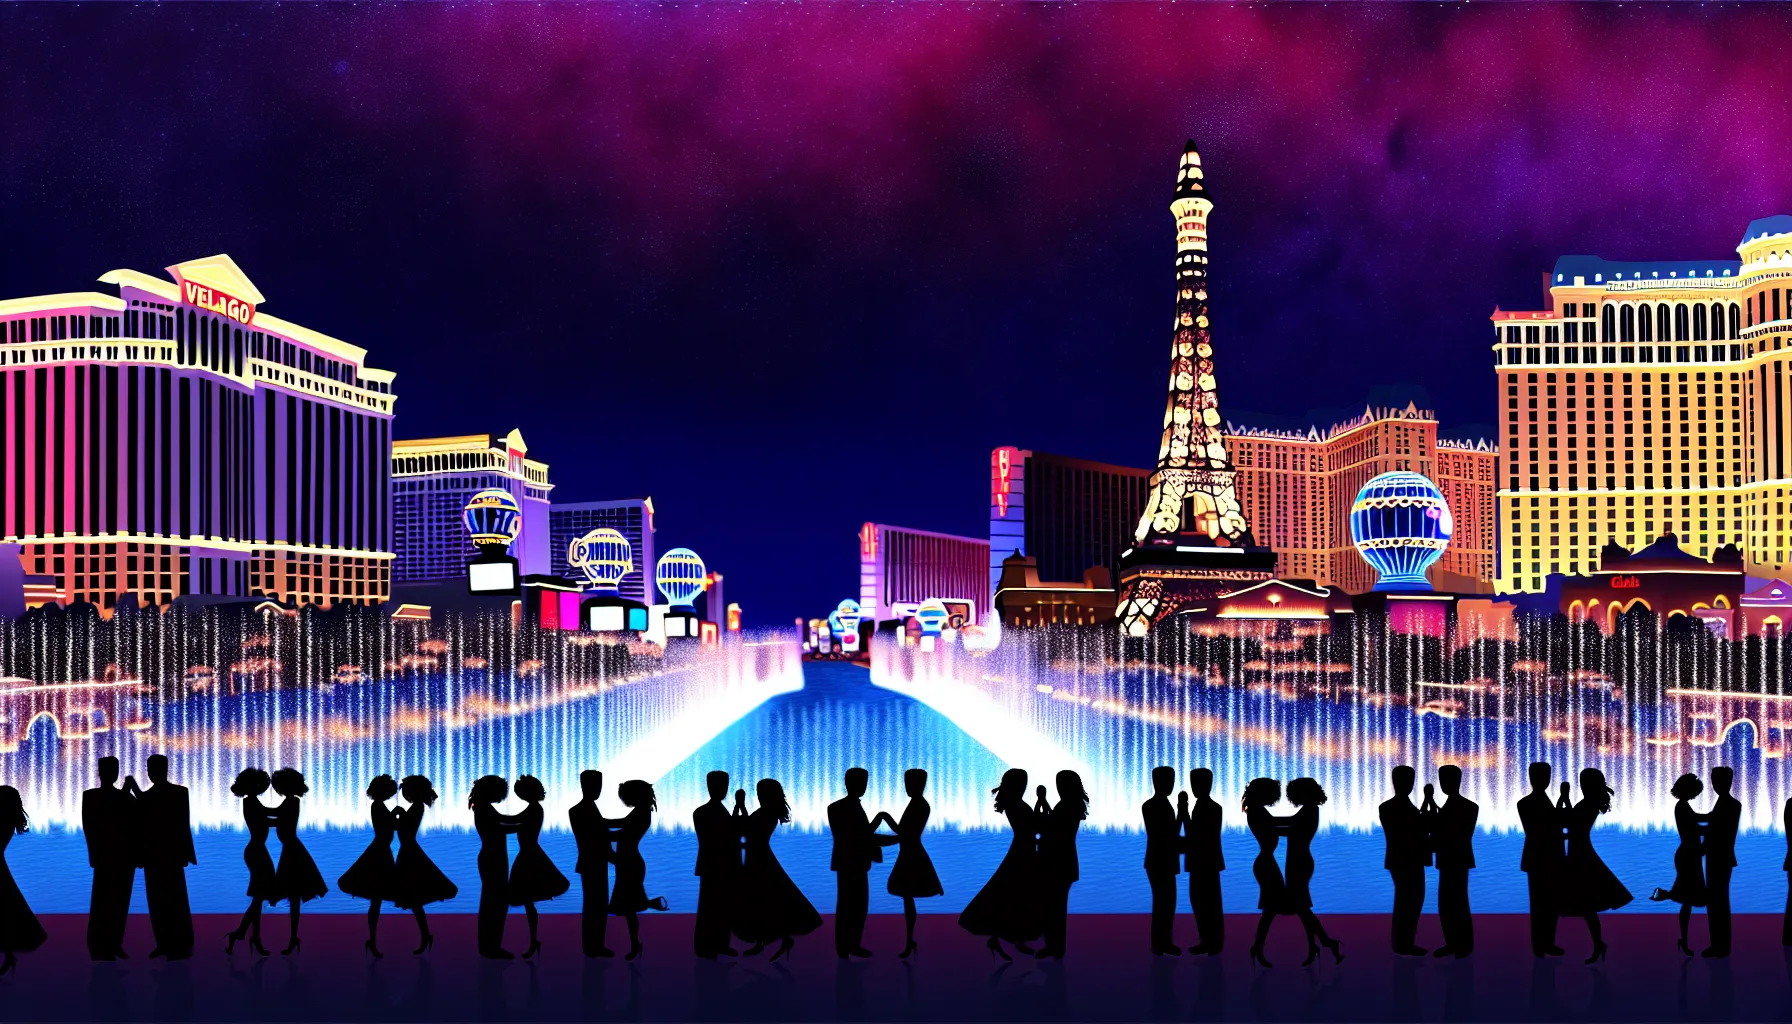 <strong>Embrace the Symphony of Lights</strong>: As the Bellagio fountains pirouette in the twilight, love takes center stage in this city that never sleeps. Here, romance is as endless as the cascade of lights that dance upon the water, inviting couples to immerse themselves in the magic of Las Vegas.